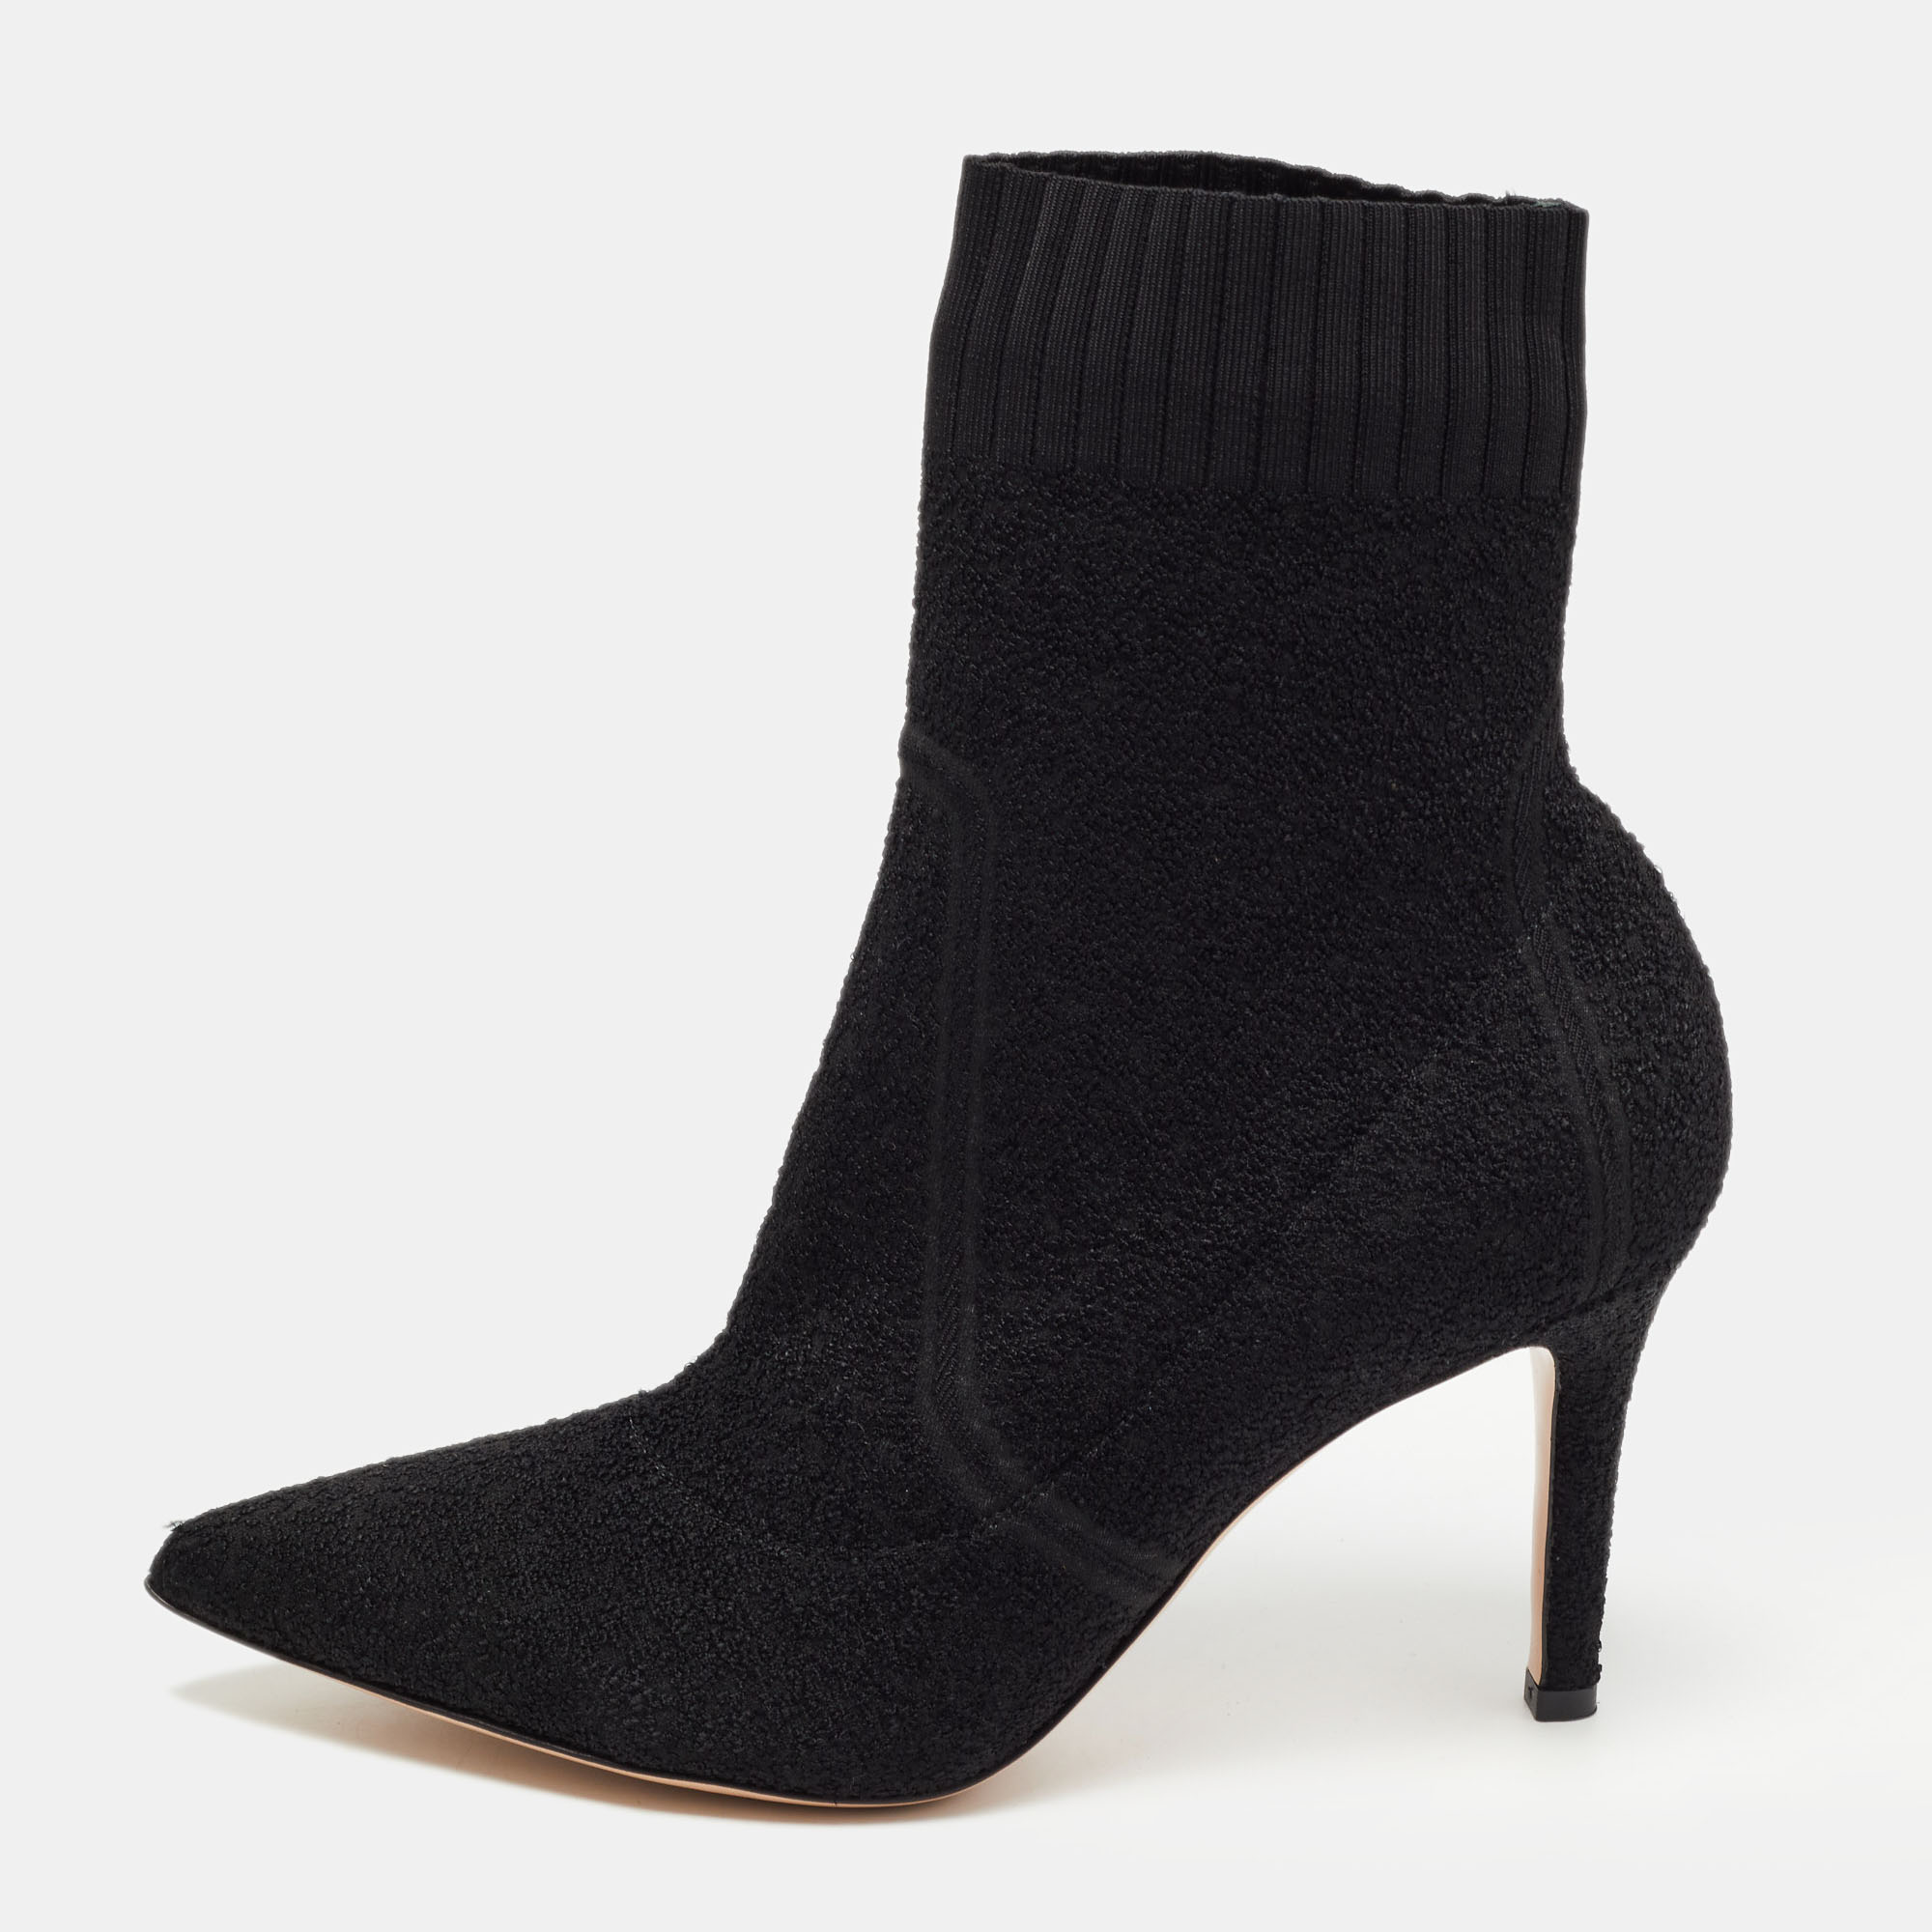 Pre-owned Gianvito Rossi Black Knit Fabric Ankle Boots Size 37.5